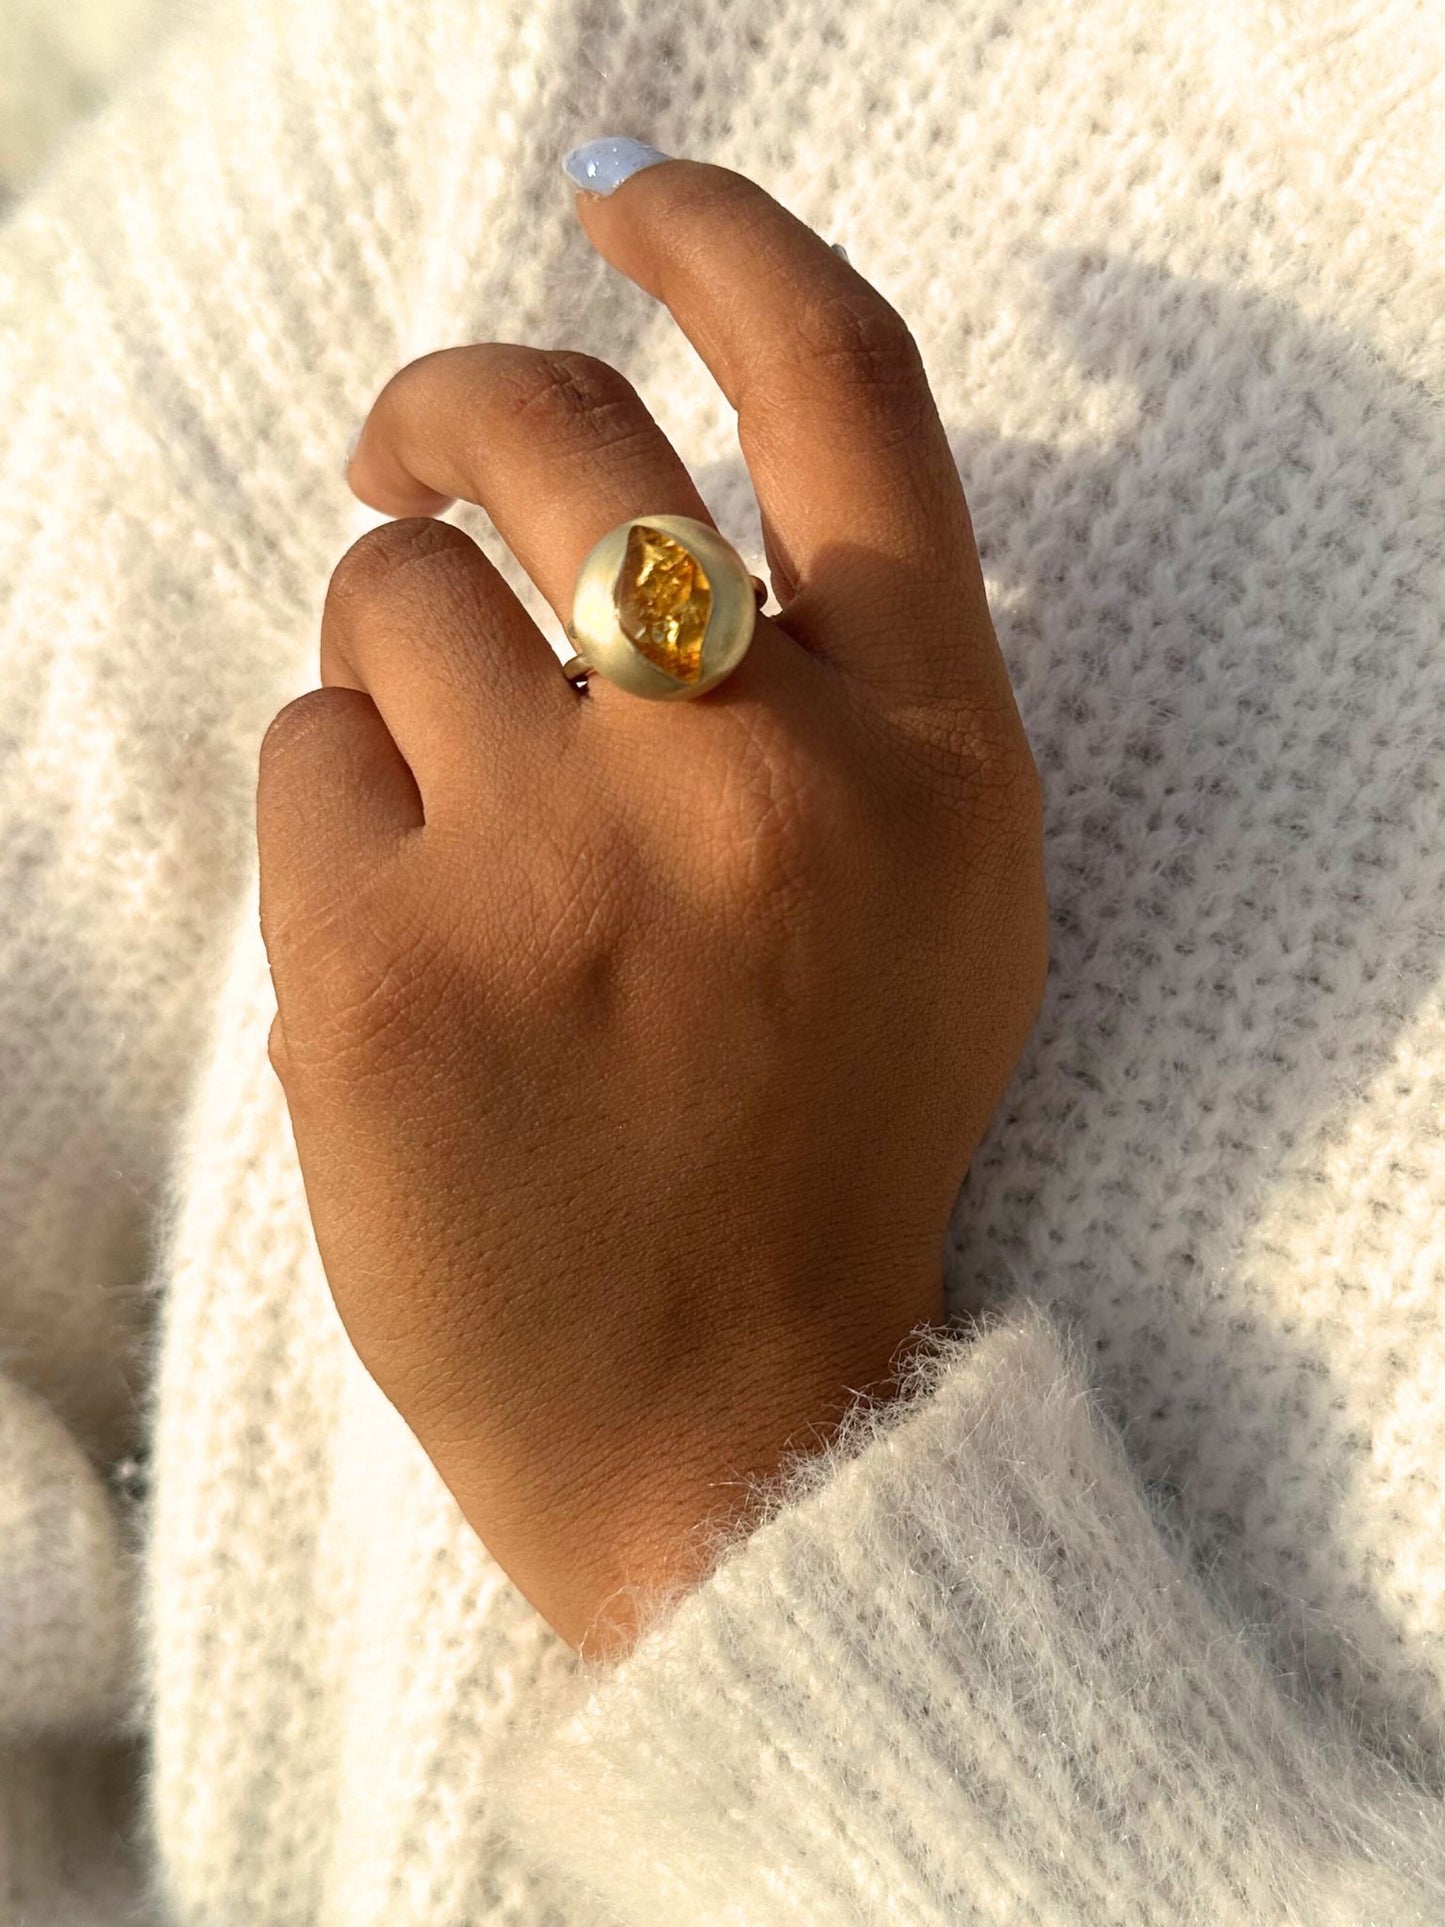 Beautiful Amber Sterling Silver Ring